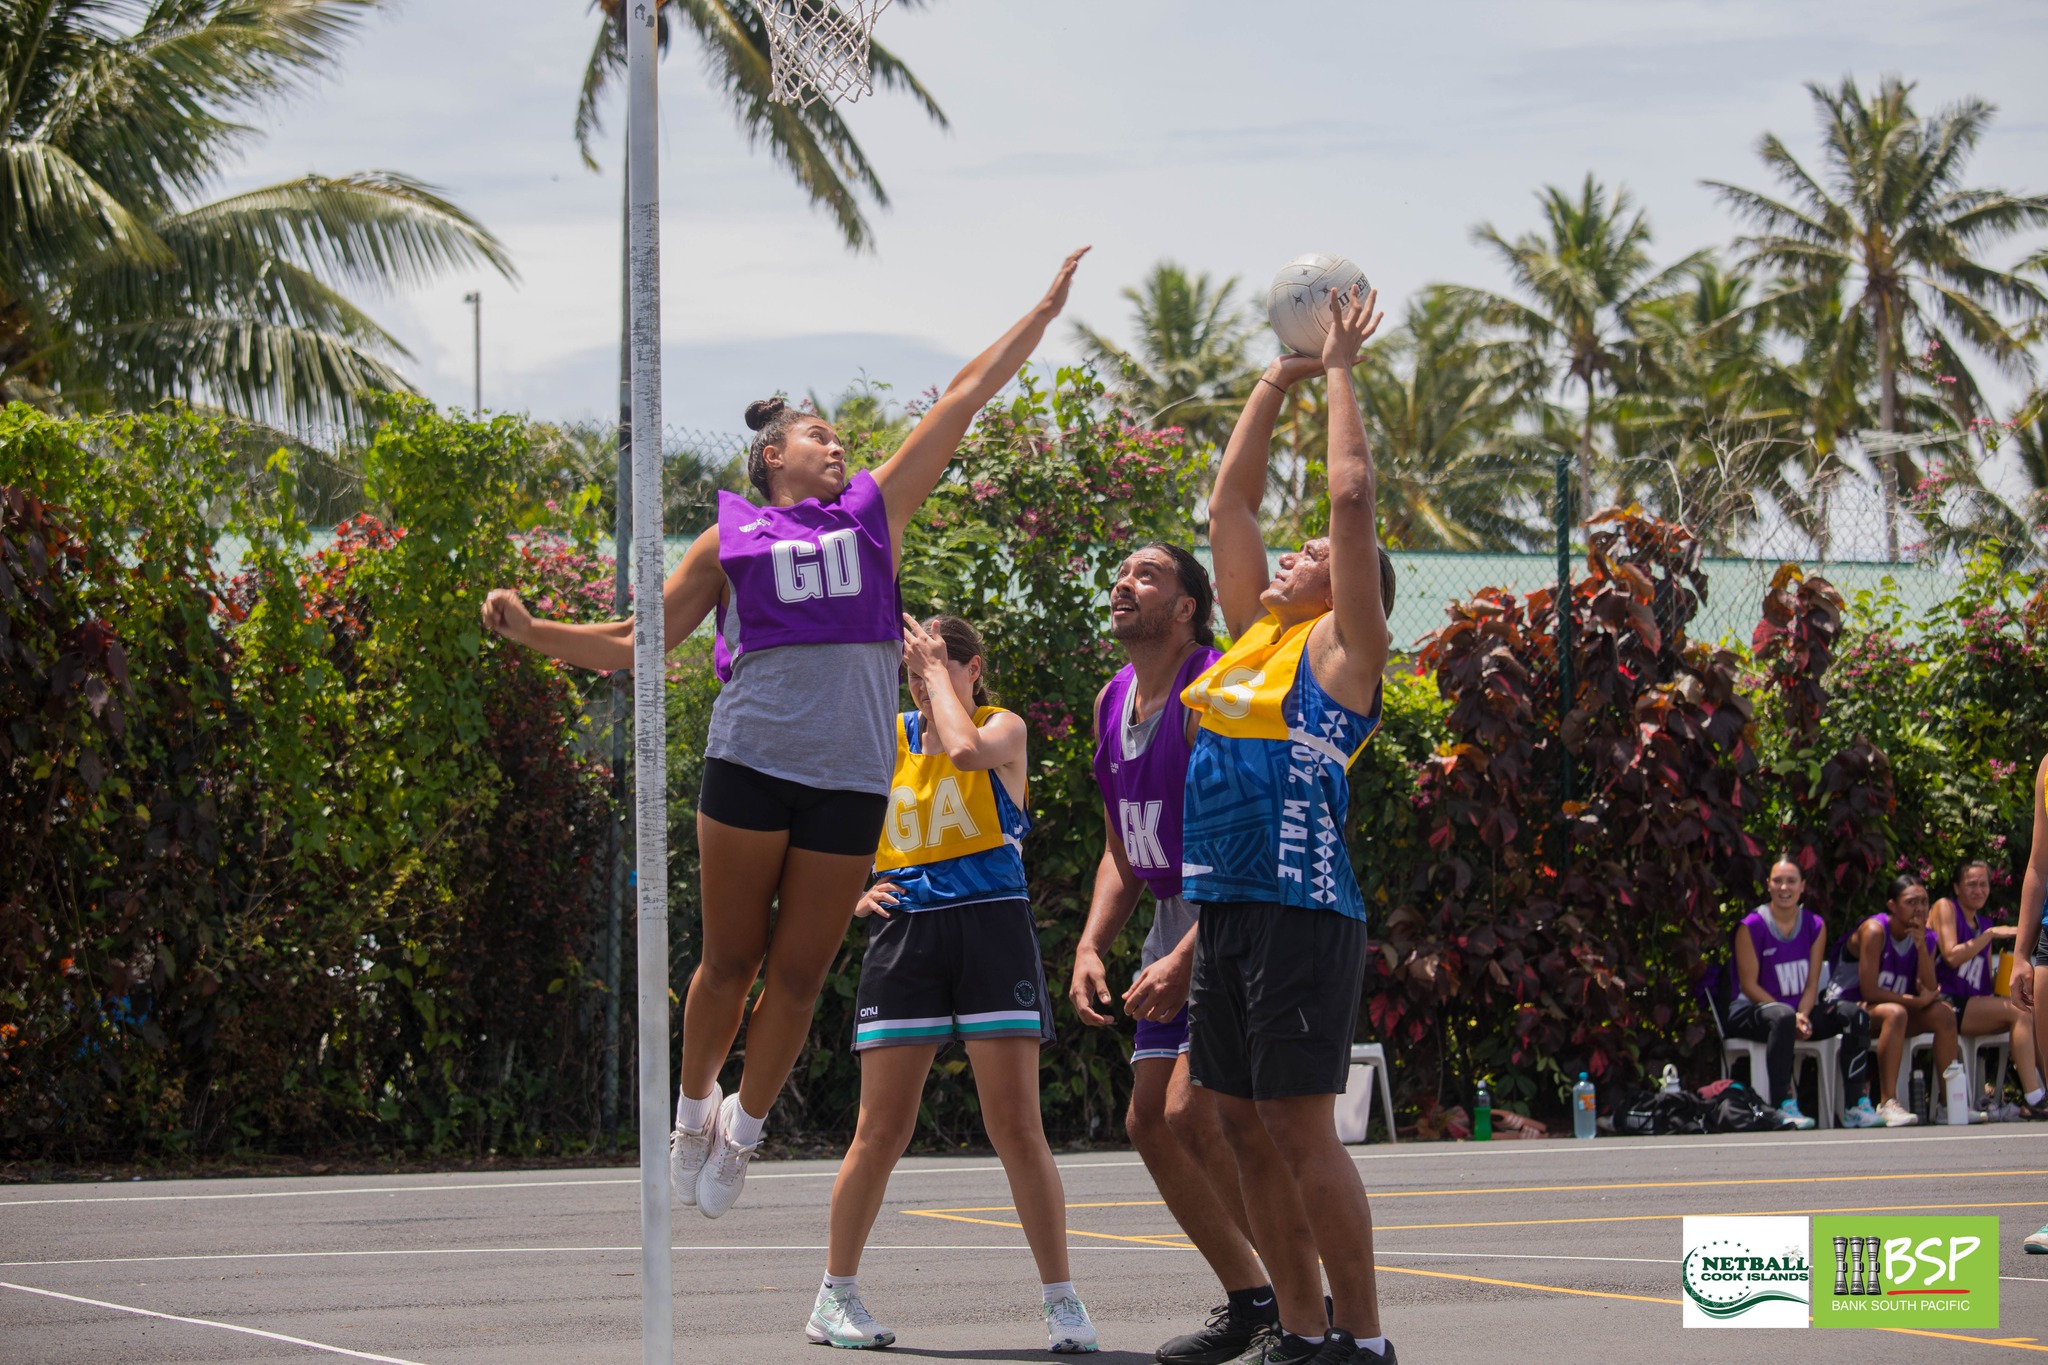 Live it, Love it: Netball in Paradise is a wrap!